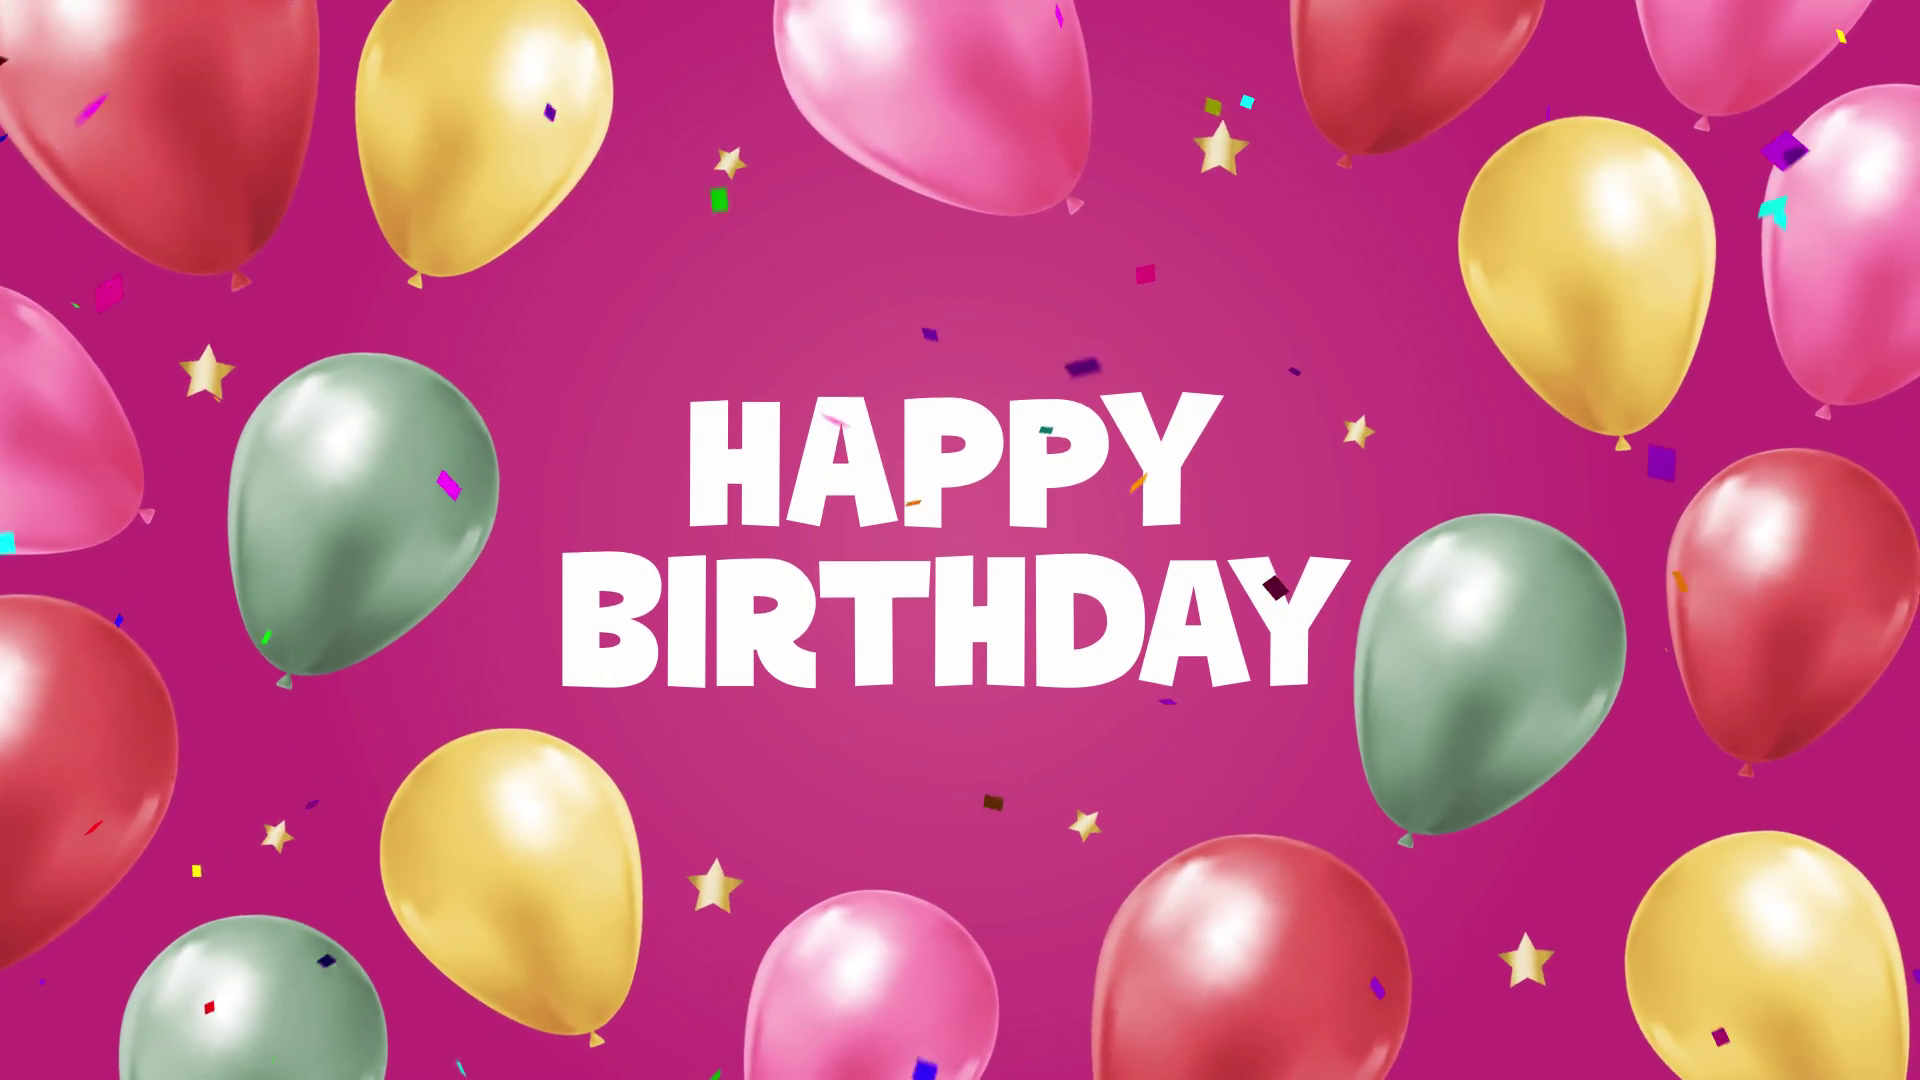 Videohive happy birthday 4 – Free After Effects Template Downloads